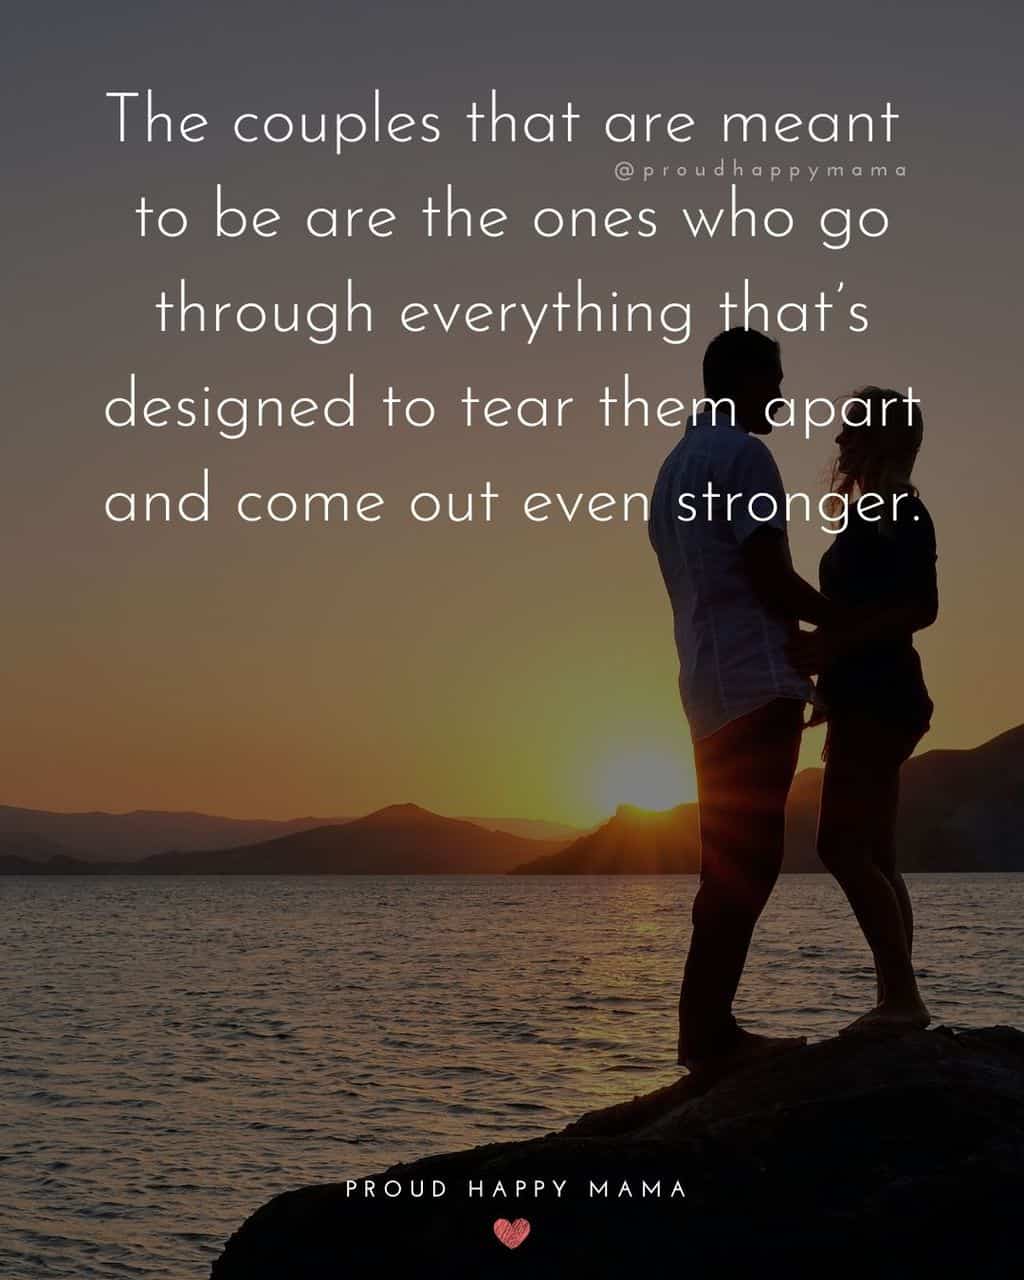 75+ BEST Marriage Quotes and Sayings [With Images]